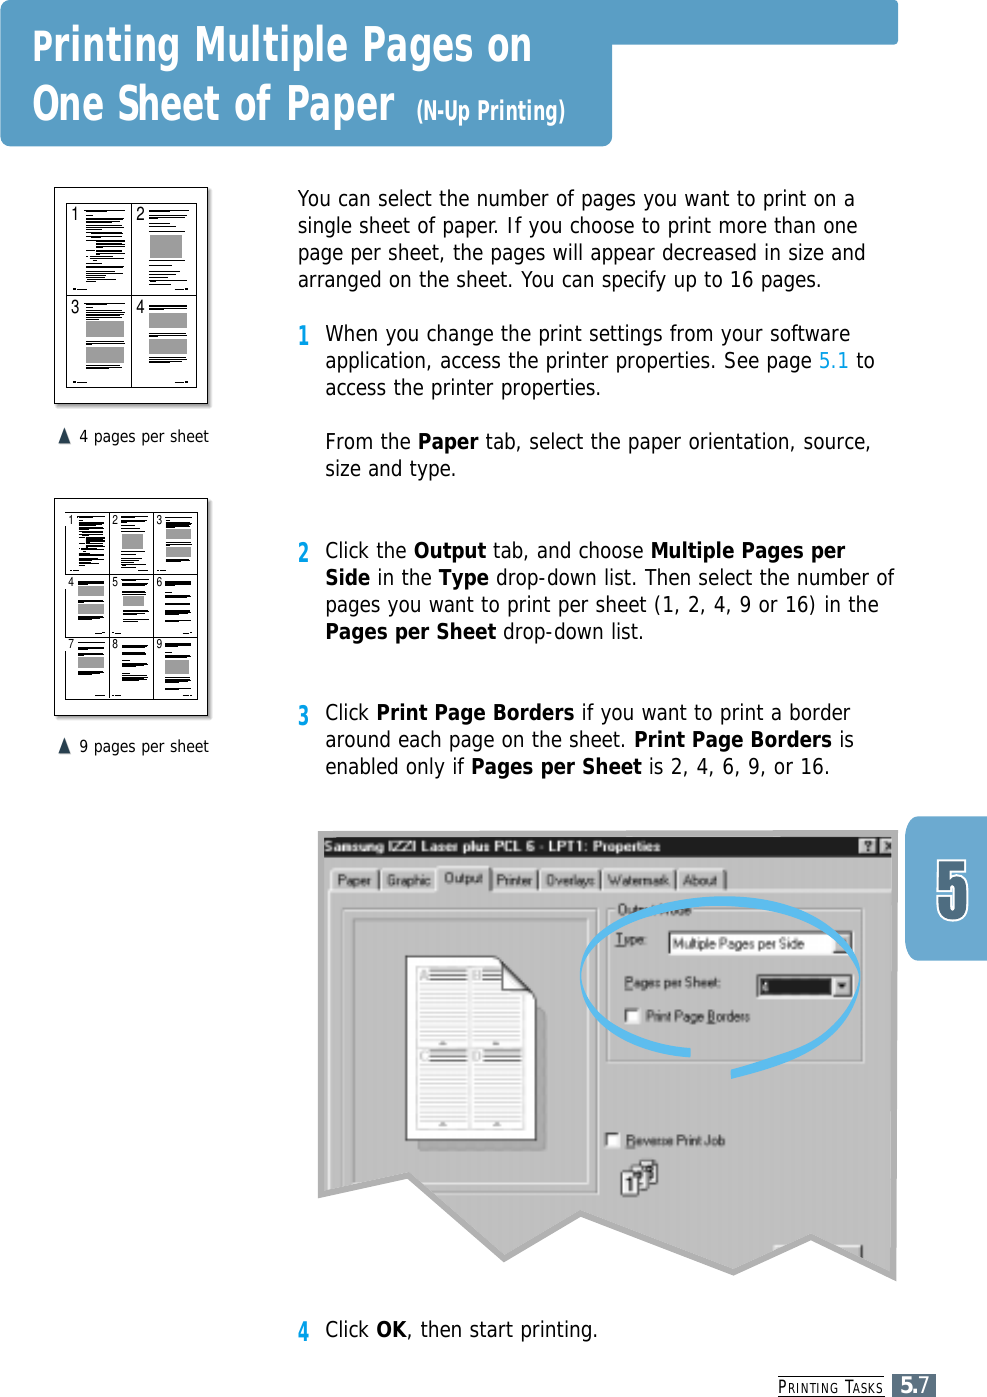 PRINTING TASKS5.71 23 4You can select the number of pages you want to print on asingle sheet of paper. If you choose to print more than onepage per sheet, the pages will appear decreased in size andarranged on the sheet. You can specify up to 16 pages.1When you change the print settings from your softwareapplication, access the printer properties. See page 5.1 toaccess the printer properties.From the Paper tab, select the paper orientation, source,size and type.2Click the Output tab, and choose Multiple Pages perSide in the Type drop-down list. Then select the number ofpages you want to print per sheet (1, 2, 4, 9 or 16) in thePages per Sheet drop-down list.3Click Print Page Borders if you want to print a borderaround each page on the sheet. Print Page Borders isenabled only if Pages per Sheet is 2, 4, 6, 9, or 16.&quot;!&quot;!4 pages per sheet1 243657 98&quot;!&quot;!9 pages per sheetPrinting Multiple Pages on One Sheet of Paper (N-Up Printing)4Click OK, then start printing. 